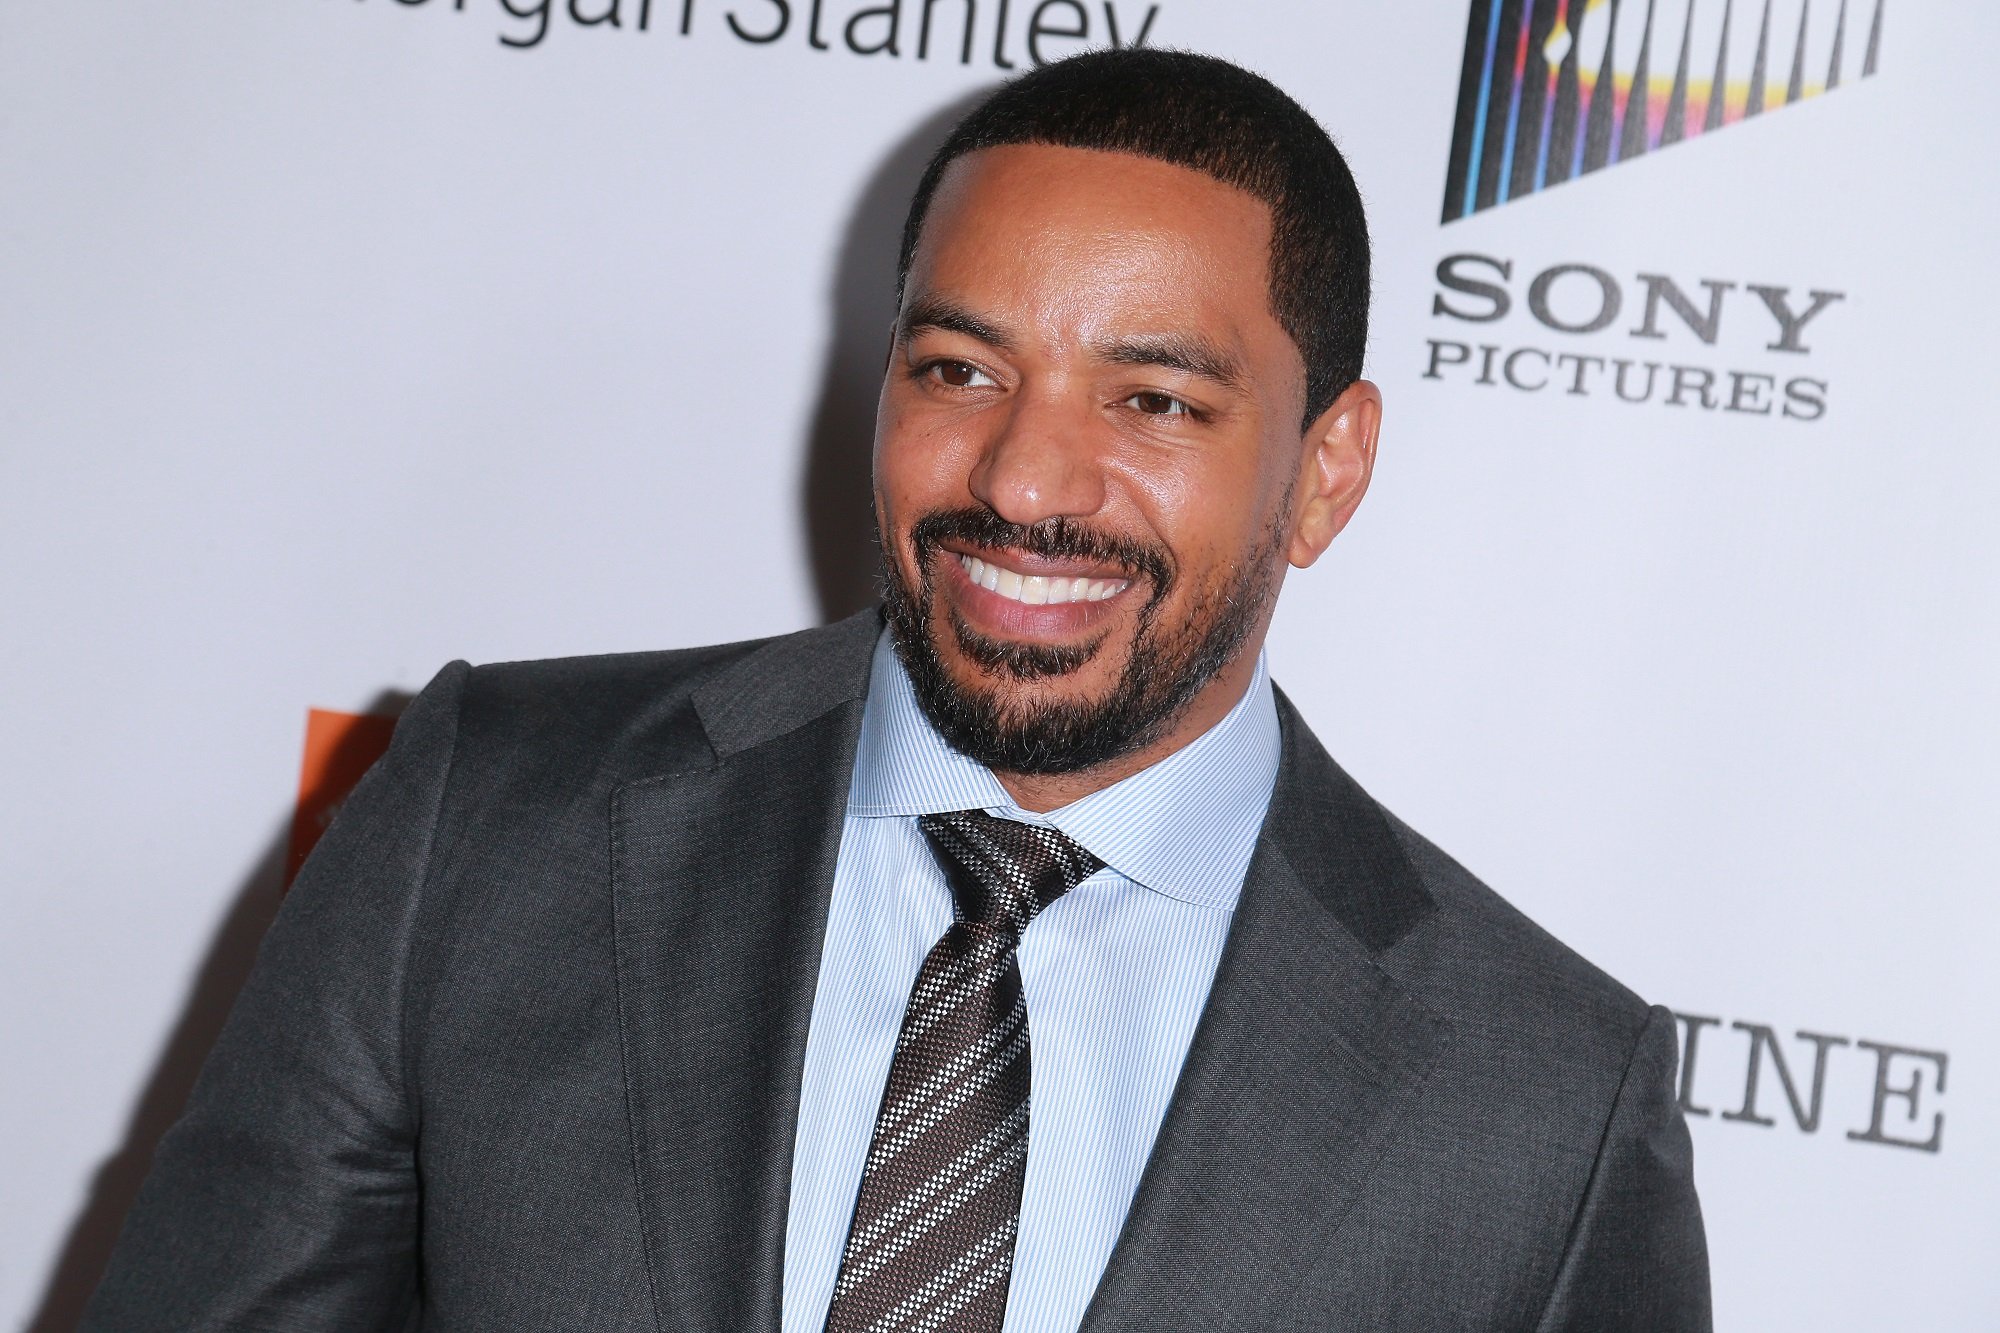 Laz Alonso attends the 9th Annual AAFCA Awards  at Taglyan Complex on February 7, 2018 in Los Angeles, California.